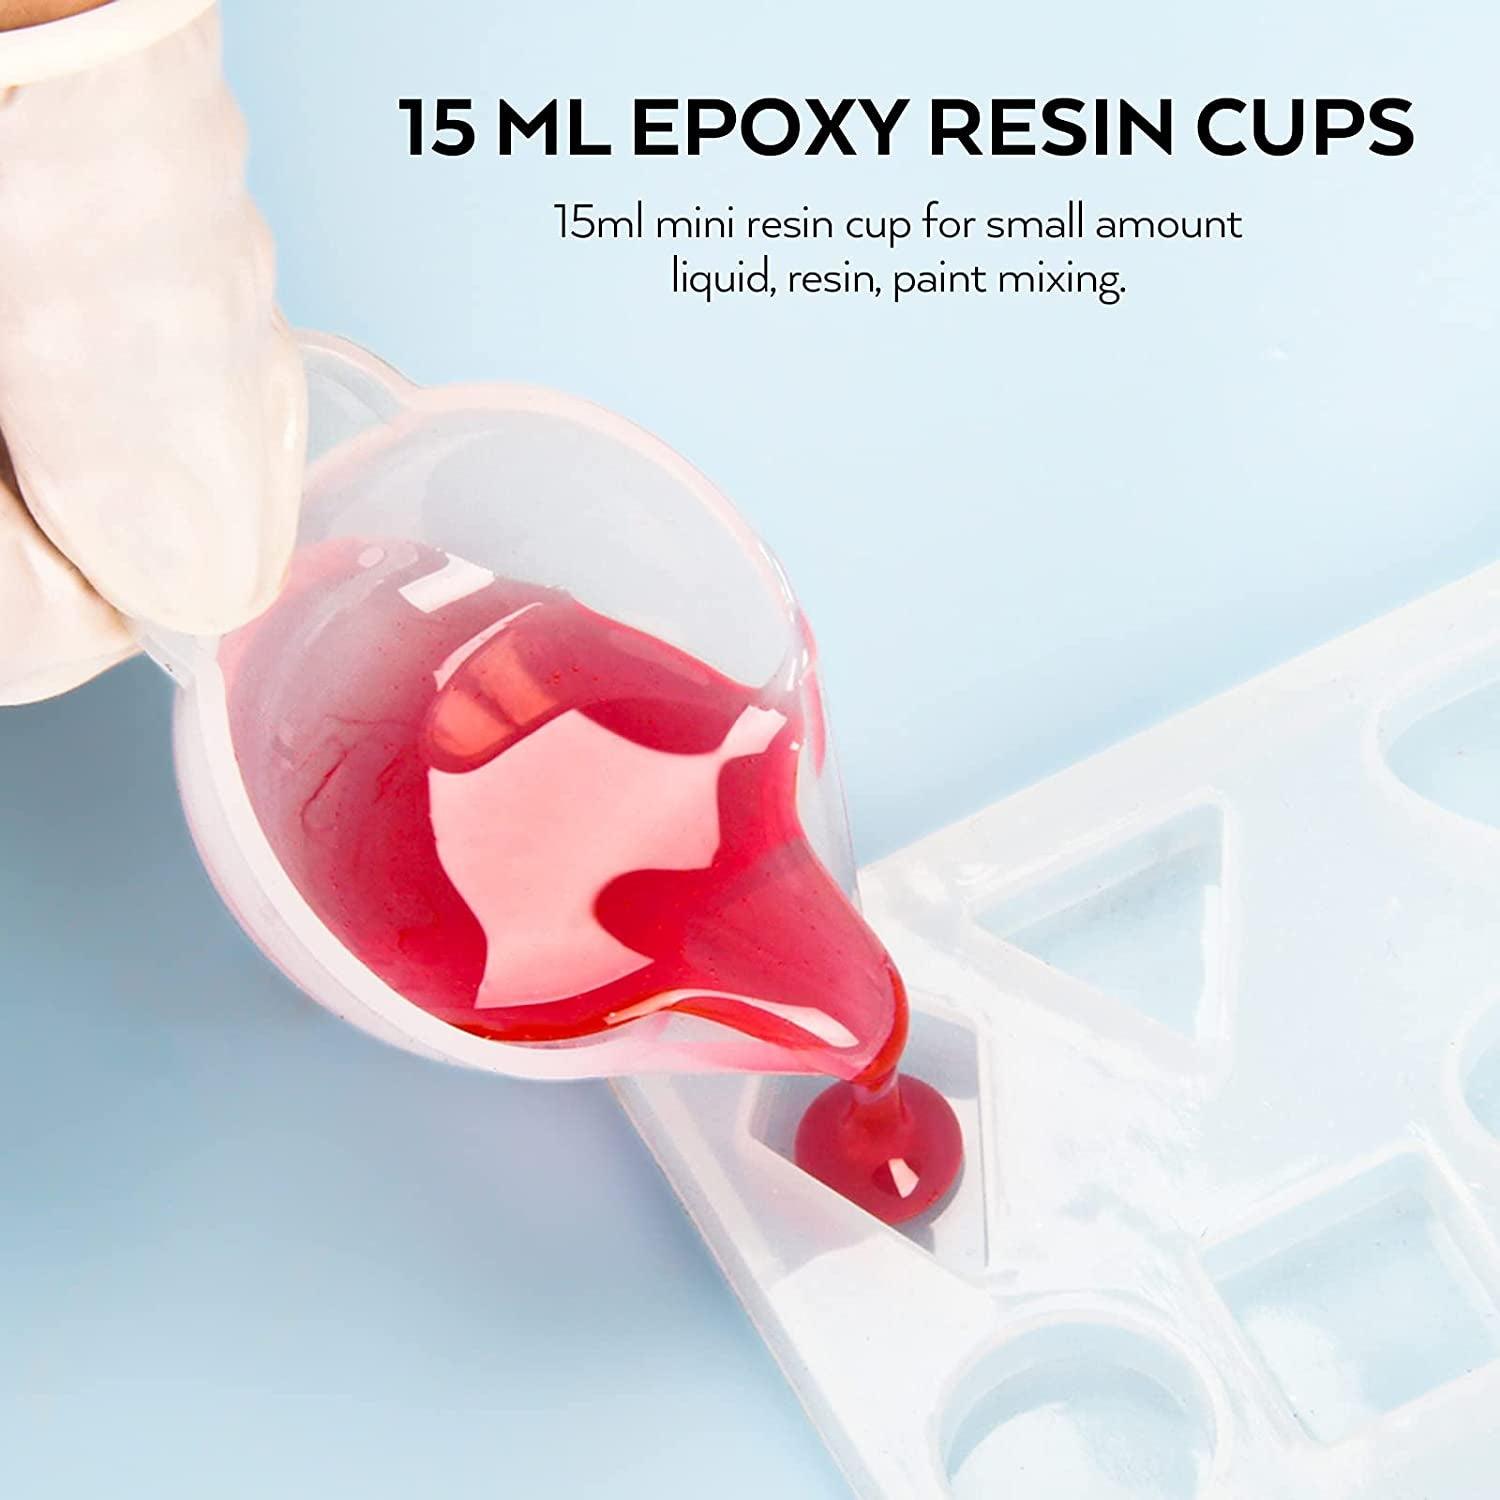 Silicone Resin Measuring Cups Tool Kit- 250 & 100 Ml Measure Cups, Silicone Popsicle Stir Sticks, Pipettes, Finger Cots for Epoxy Resin Mixing, Molds, Jewelry Making, Waxing, Easy Clean - WoodArtSupply